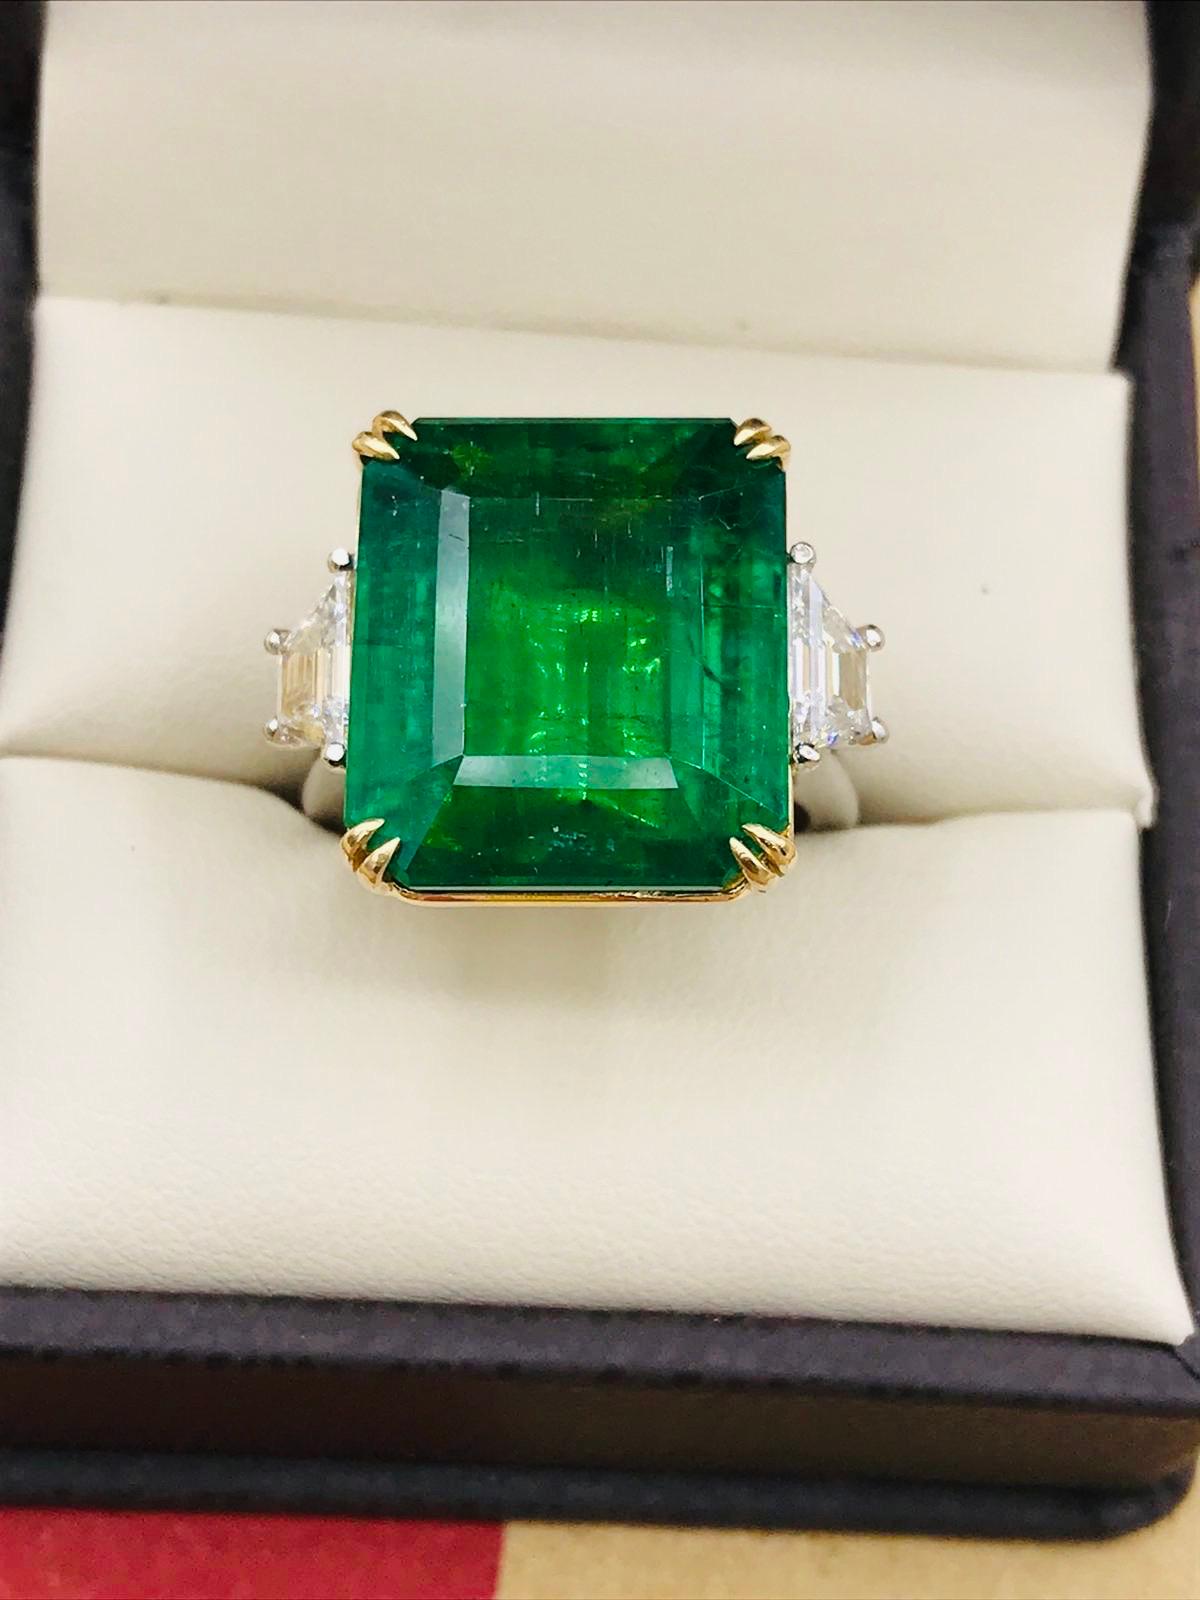 Emilio Jewelry Certified Vivid Green 17.08 Carat Emerald Diamond Ring
Showcasing a gorgeous Emerald cut Genuine Emerald Certified by C.Dunaigre. The emerald color is certified as Vivid green, the most desirable color in emeralds. The origin is